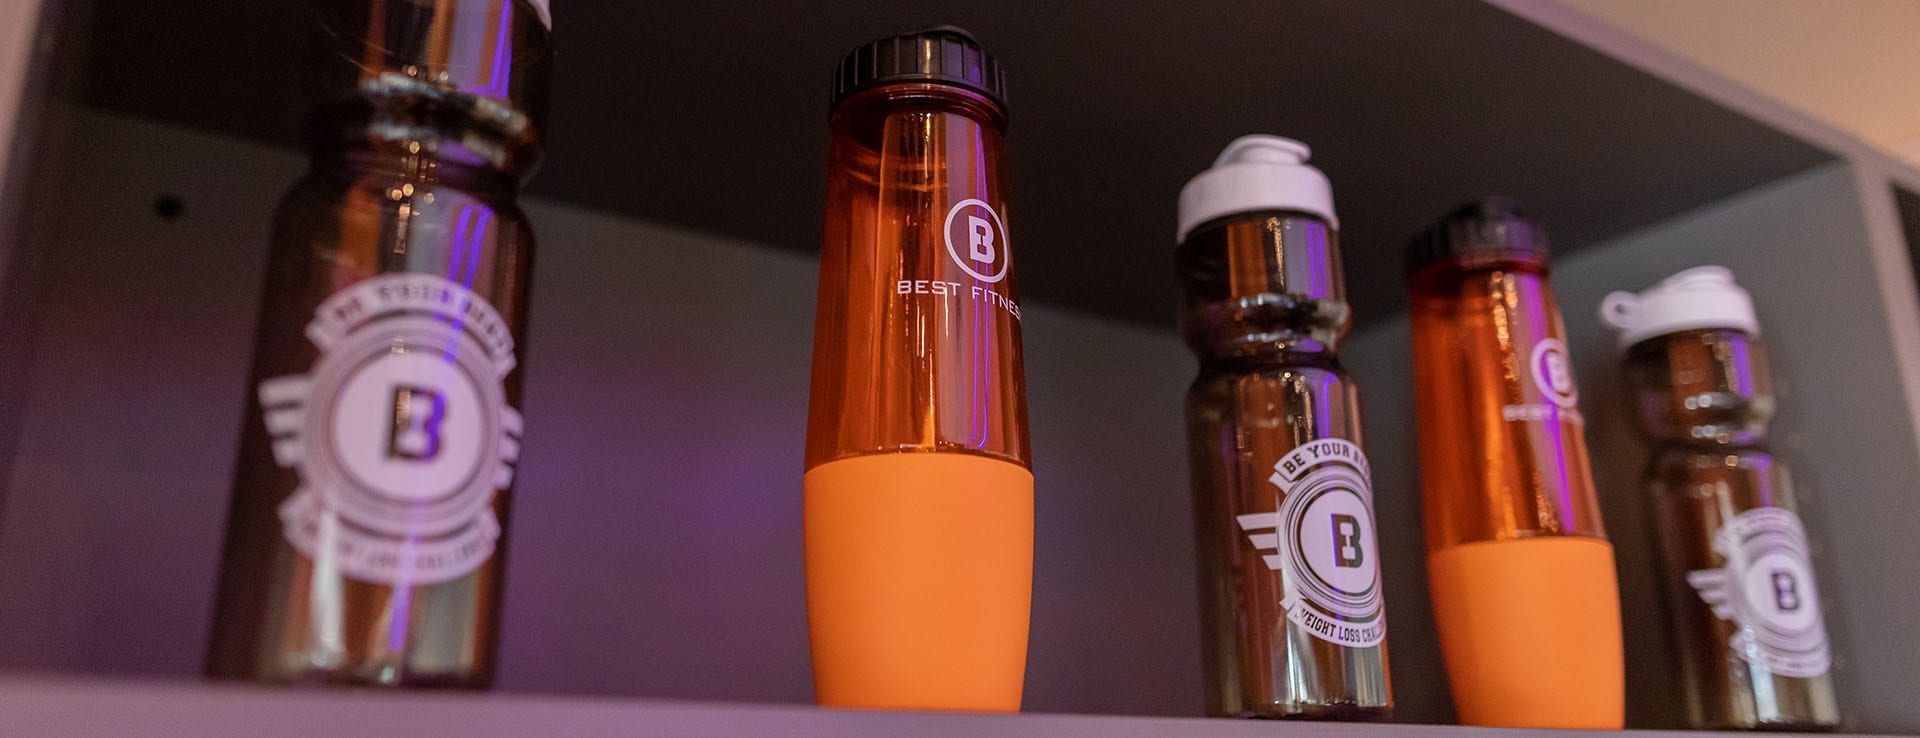 best fitness water bottles at gym near me